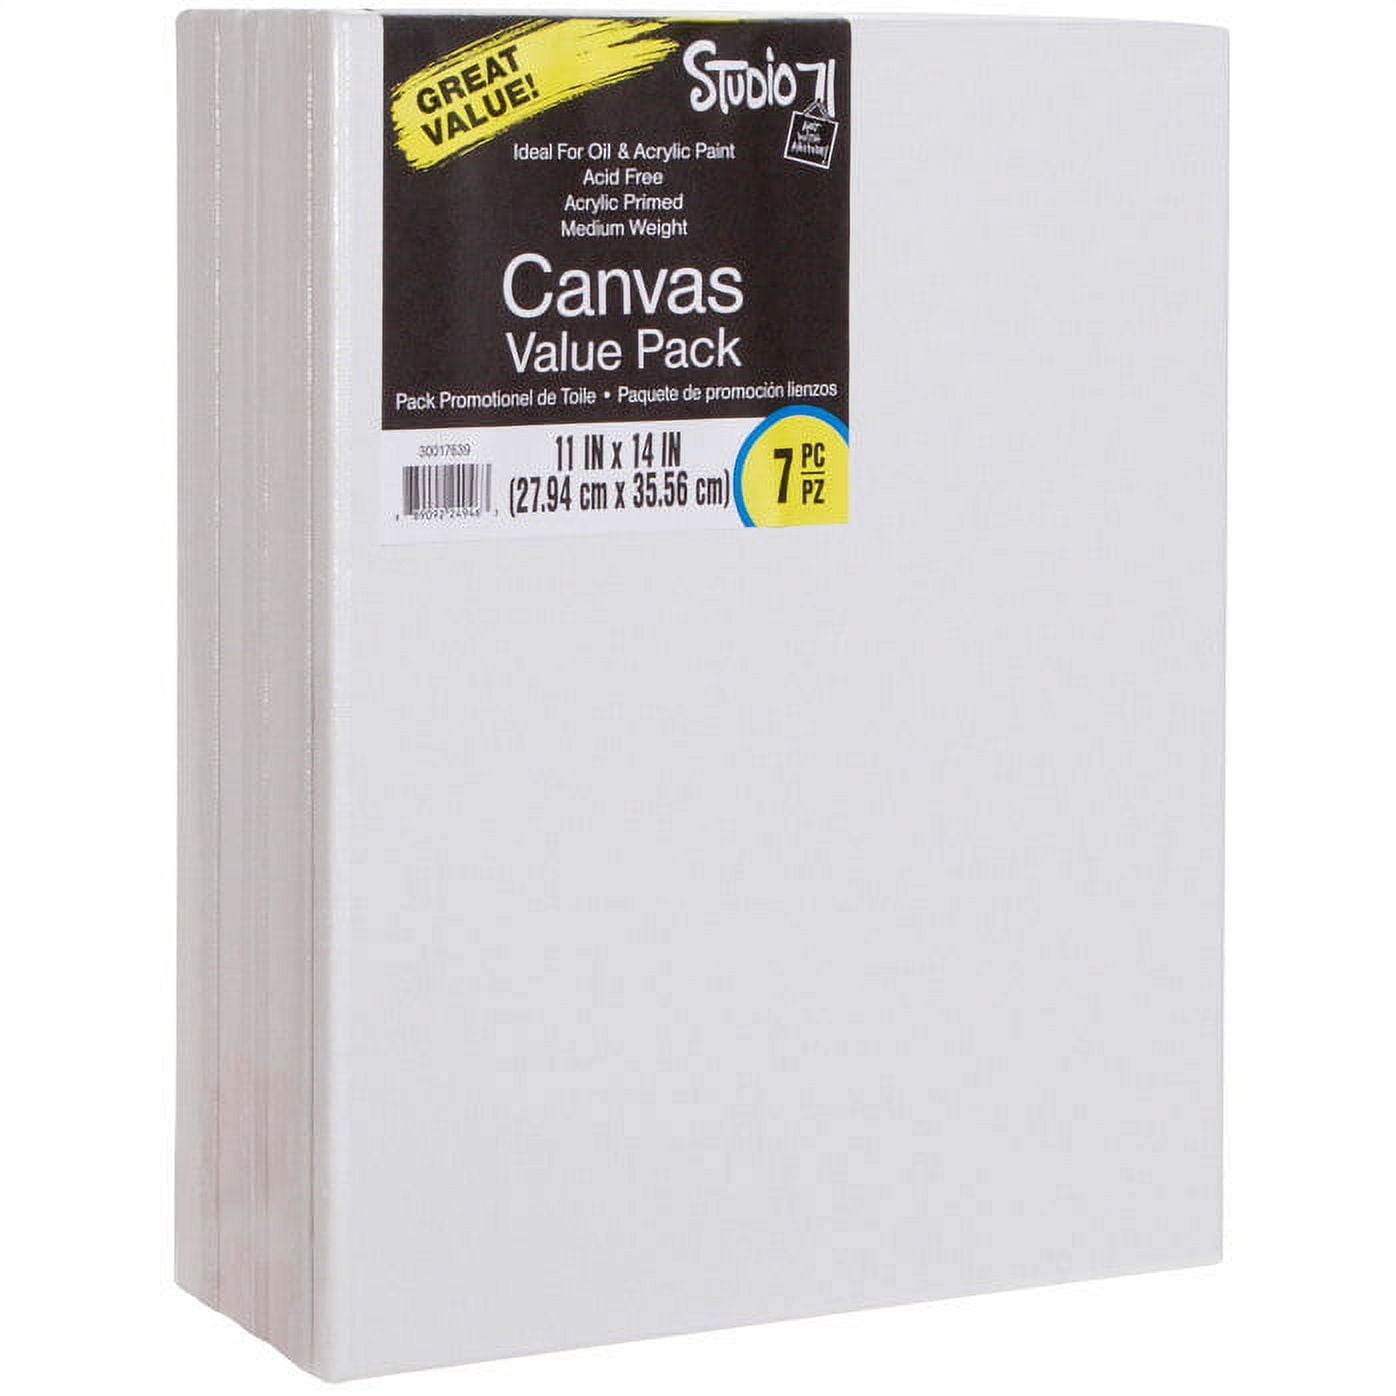 Artkey Canvas Panels 8x10 inch 12-Pack, 10 oz Double Primed Acid-Free 100% Cotton Paint Canvases for Painting, Blank Flat Canvas Board for Acrylics